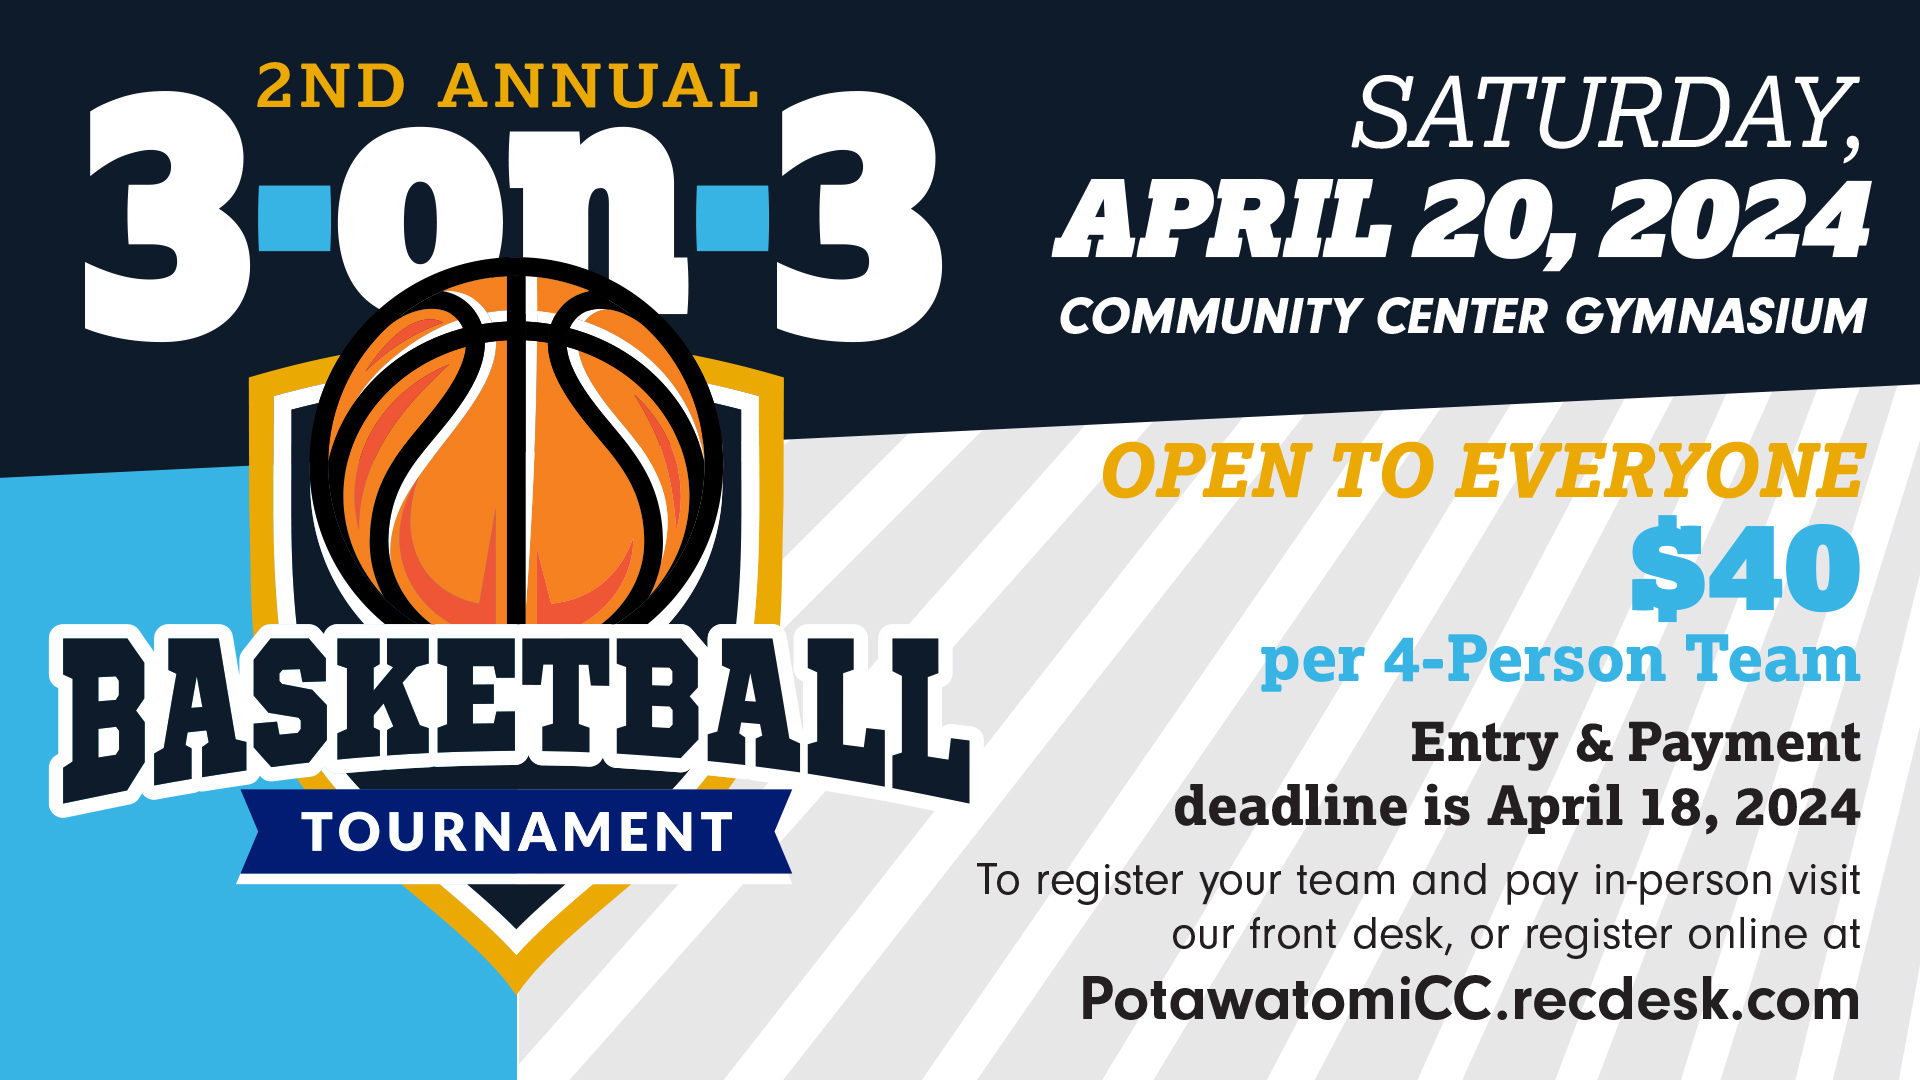 2nd Annual 3-on-3 Basketball Tournament